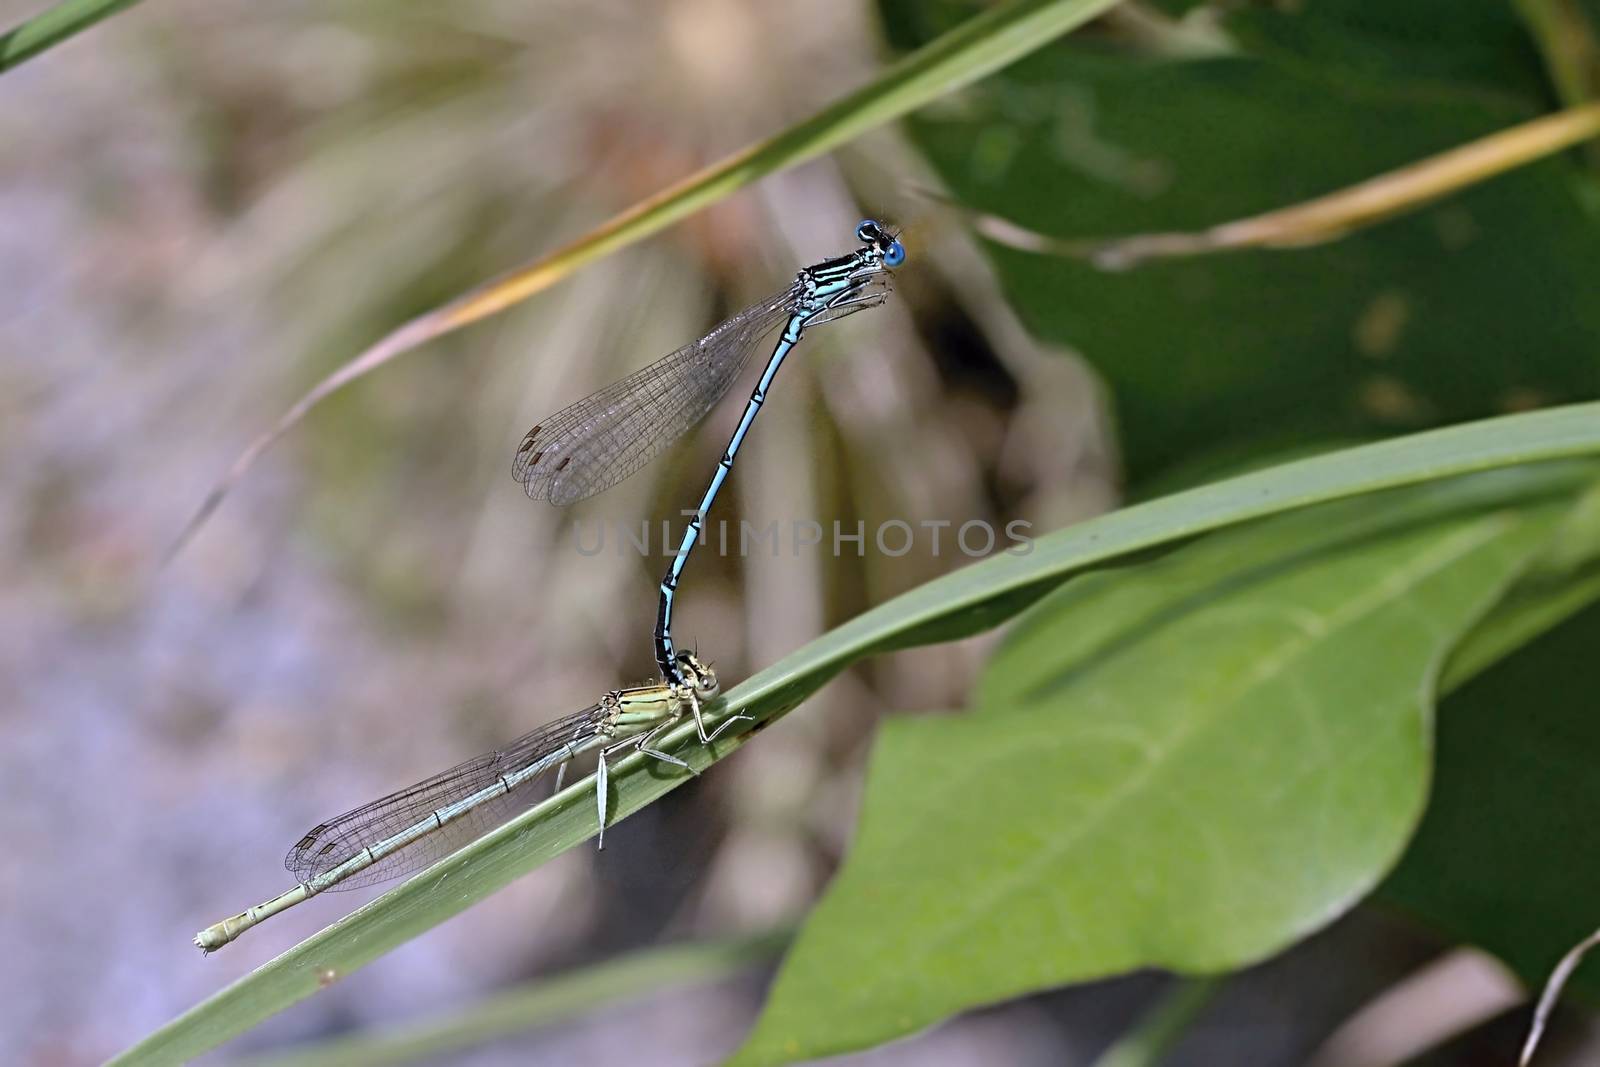 Photo shows details of a dragon fly on a leaf.